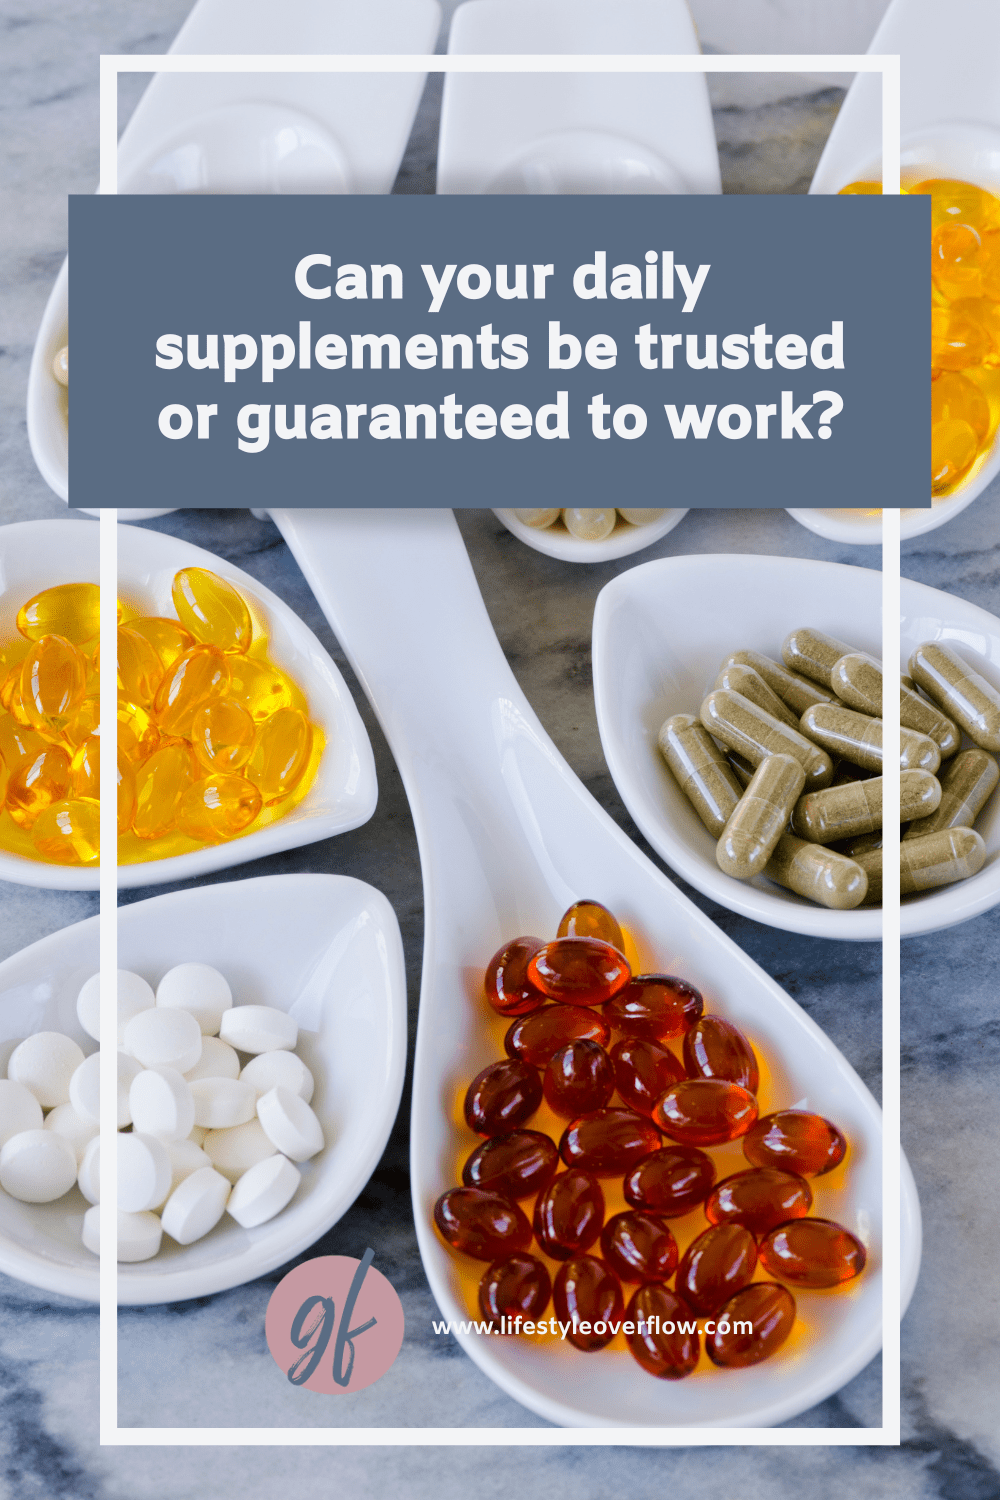 Can your daily supplements be trusted or guaranteed to work? Blog post by Gina Forcatto | graphic showing spoons filled with different supplements